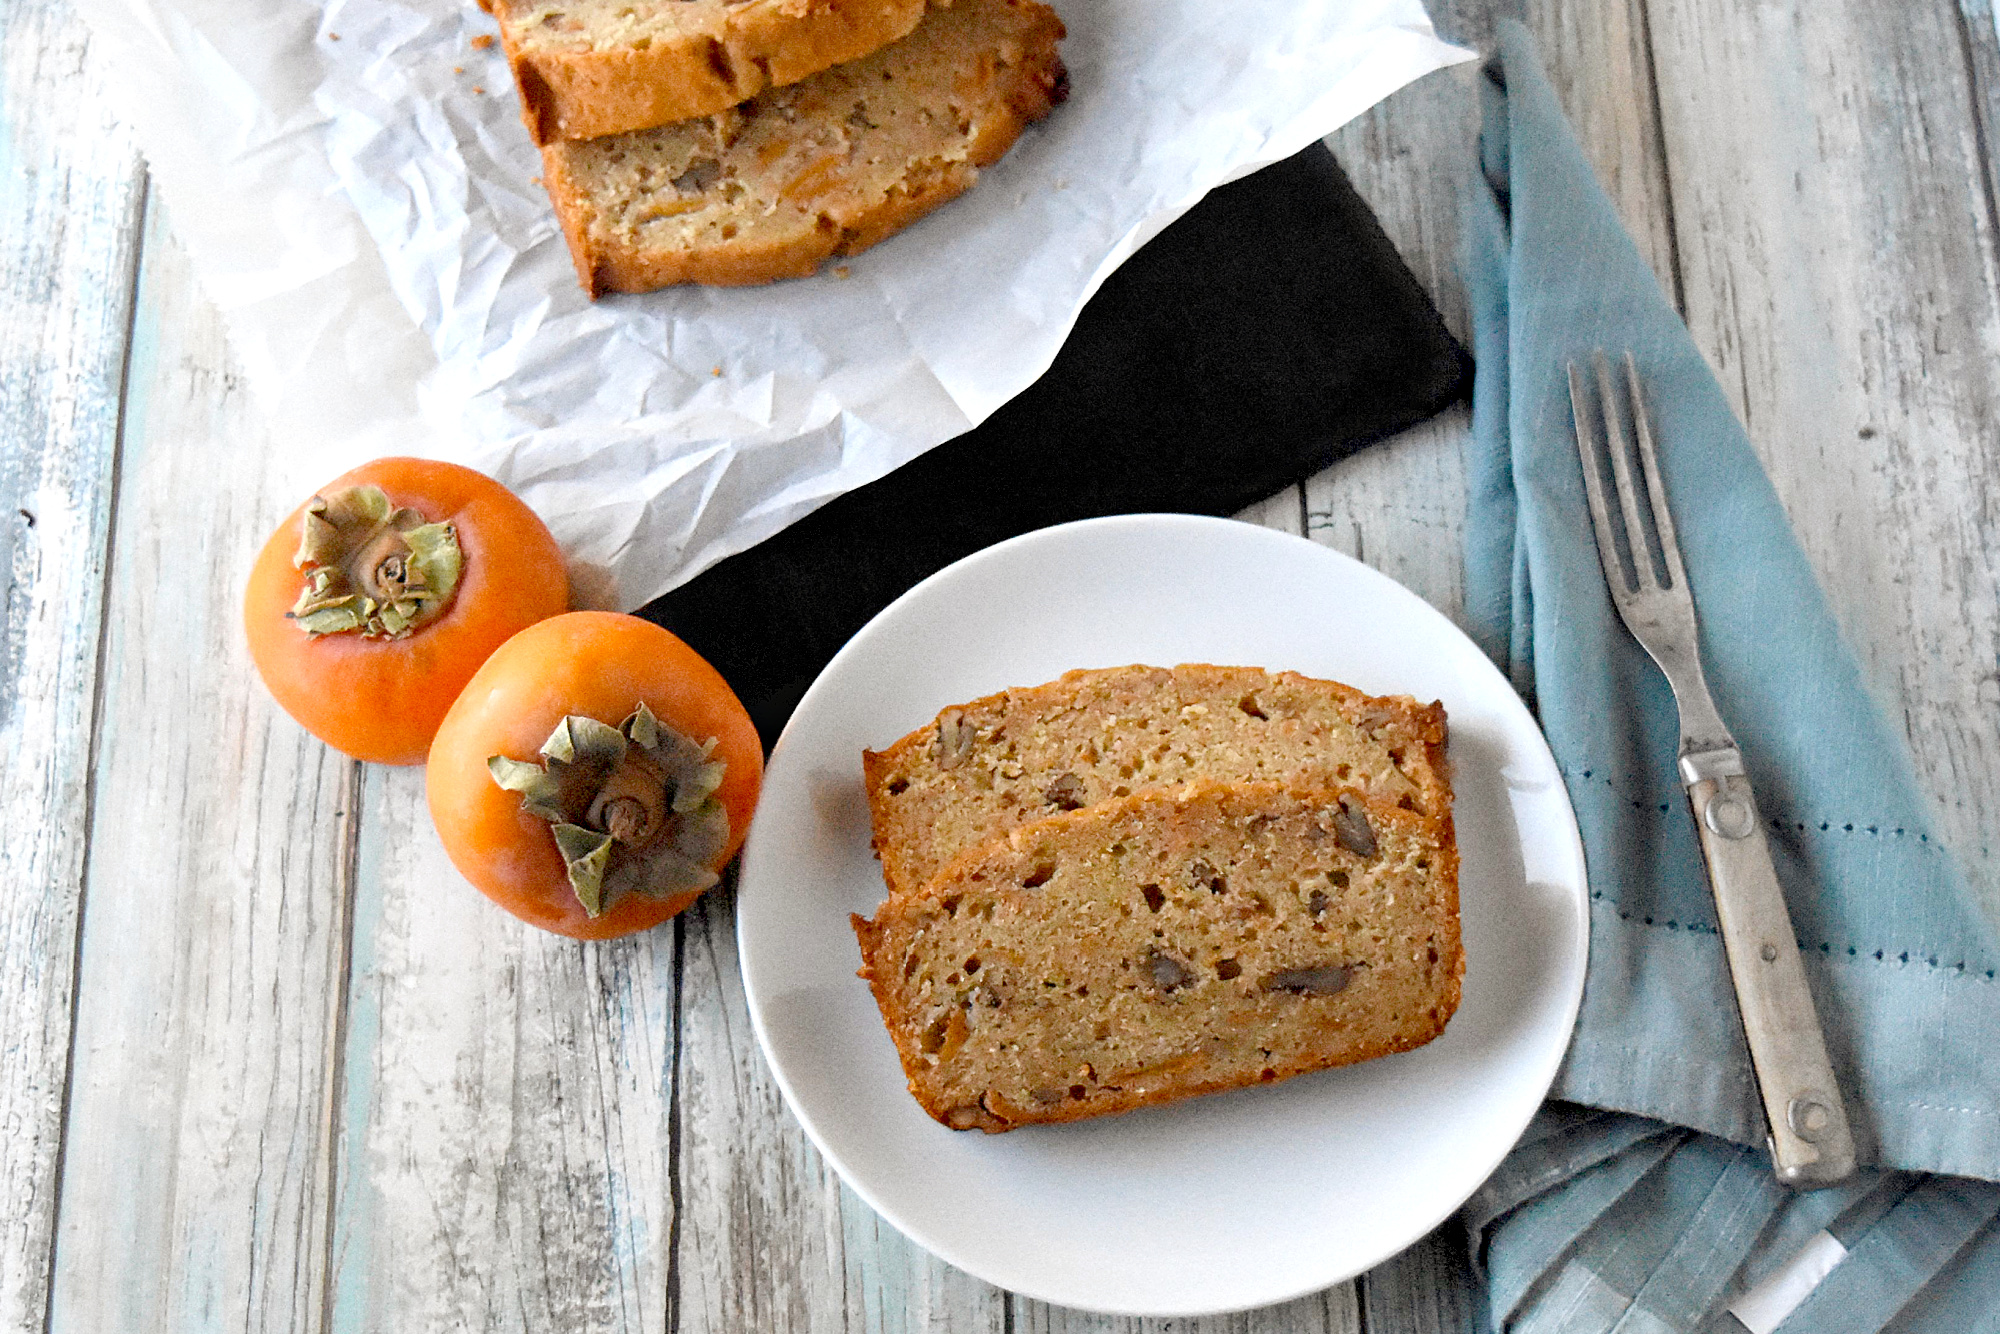 Bourbon Pecan Persimmon Bread has a hint of bourbon and persimmon packed with crunchy pecans. It’s moist, delicious, and packed full of deliciously ripe persimmons. #FamilyBakingChallenge #OurFamilyTable